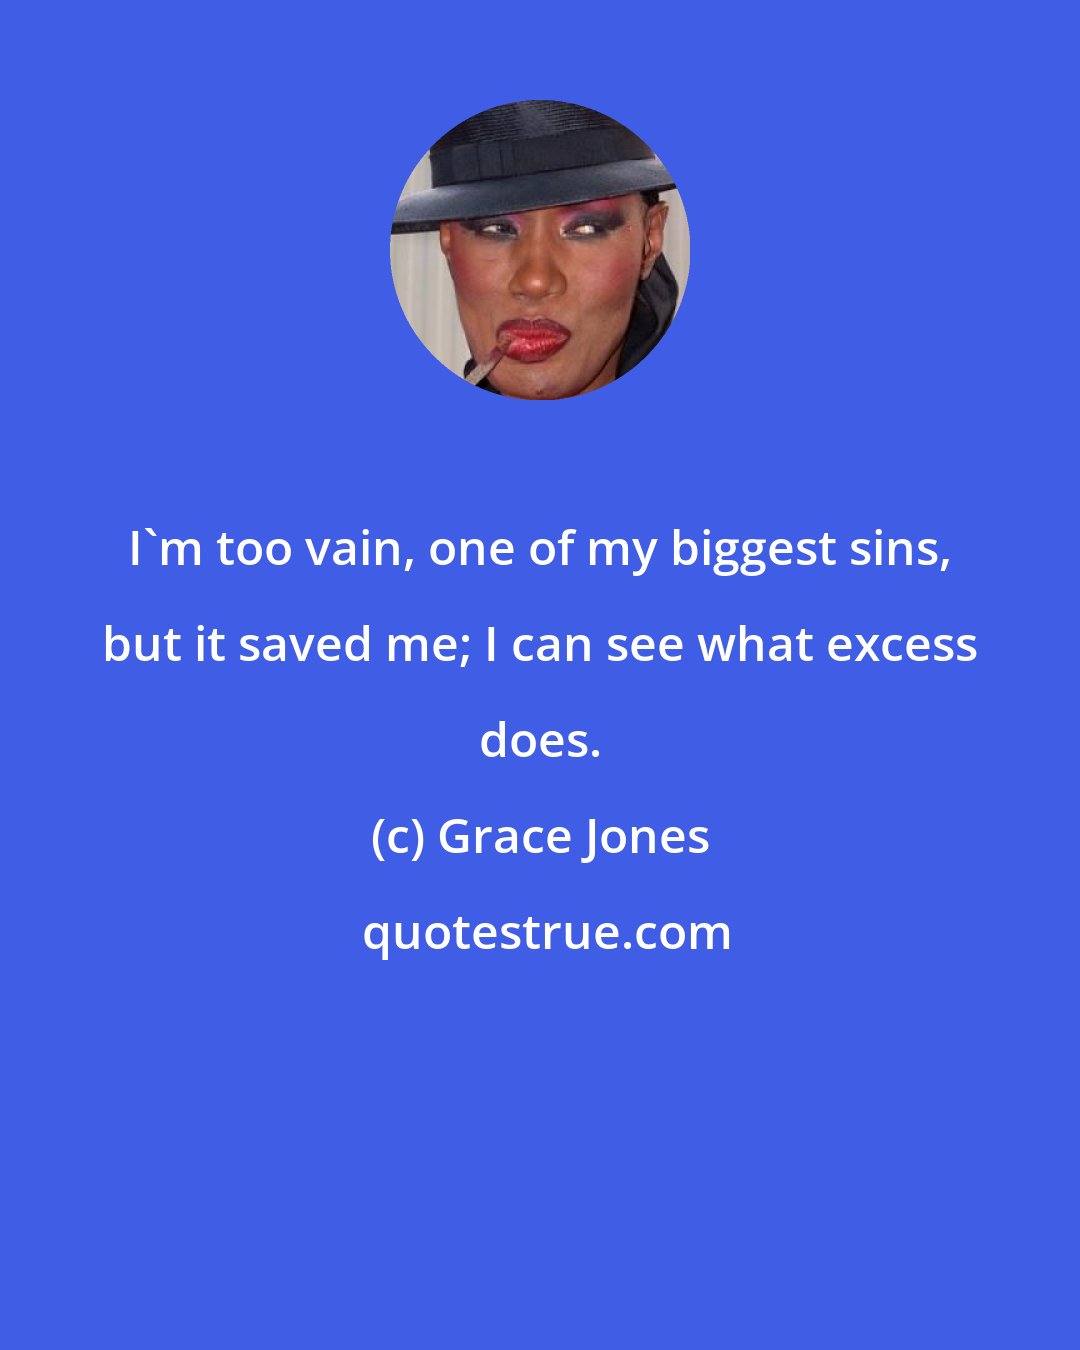 Grace Jones: I'm too vain, one of my biggest sins, but it saved me; I can see what excess does.